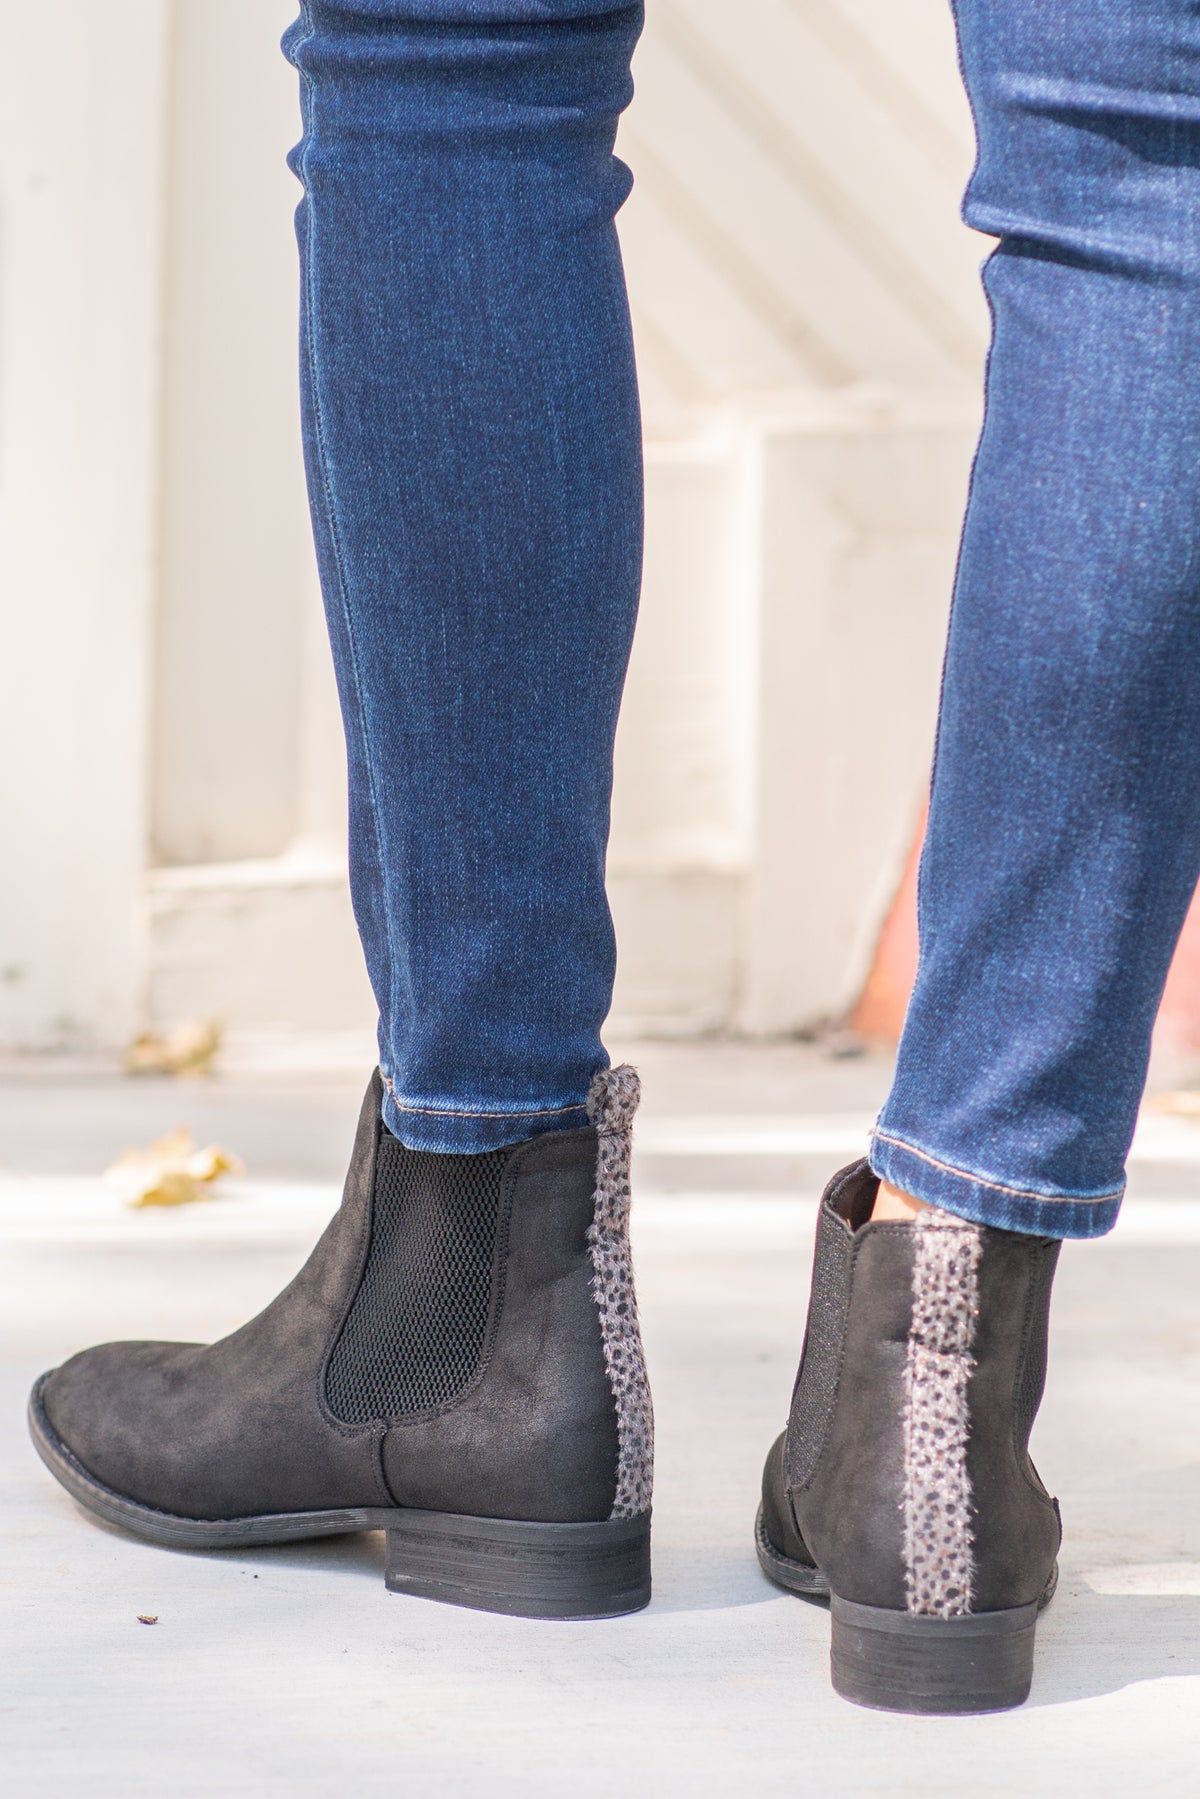 Booties | Very G  These booties from Very G are perfect to wear with your favorite jeans this is fall.  Style Name: Blake  Color: Black Cut: Silp On Bootie   Rubber Sole Style #: VGLB0136 Contact us for any additional measurements or sizing.  